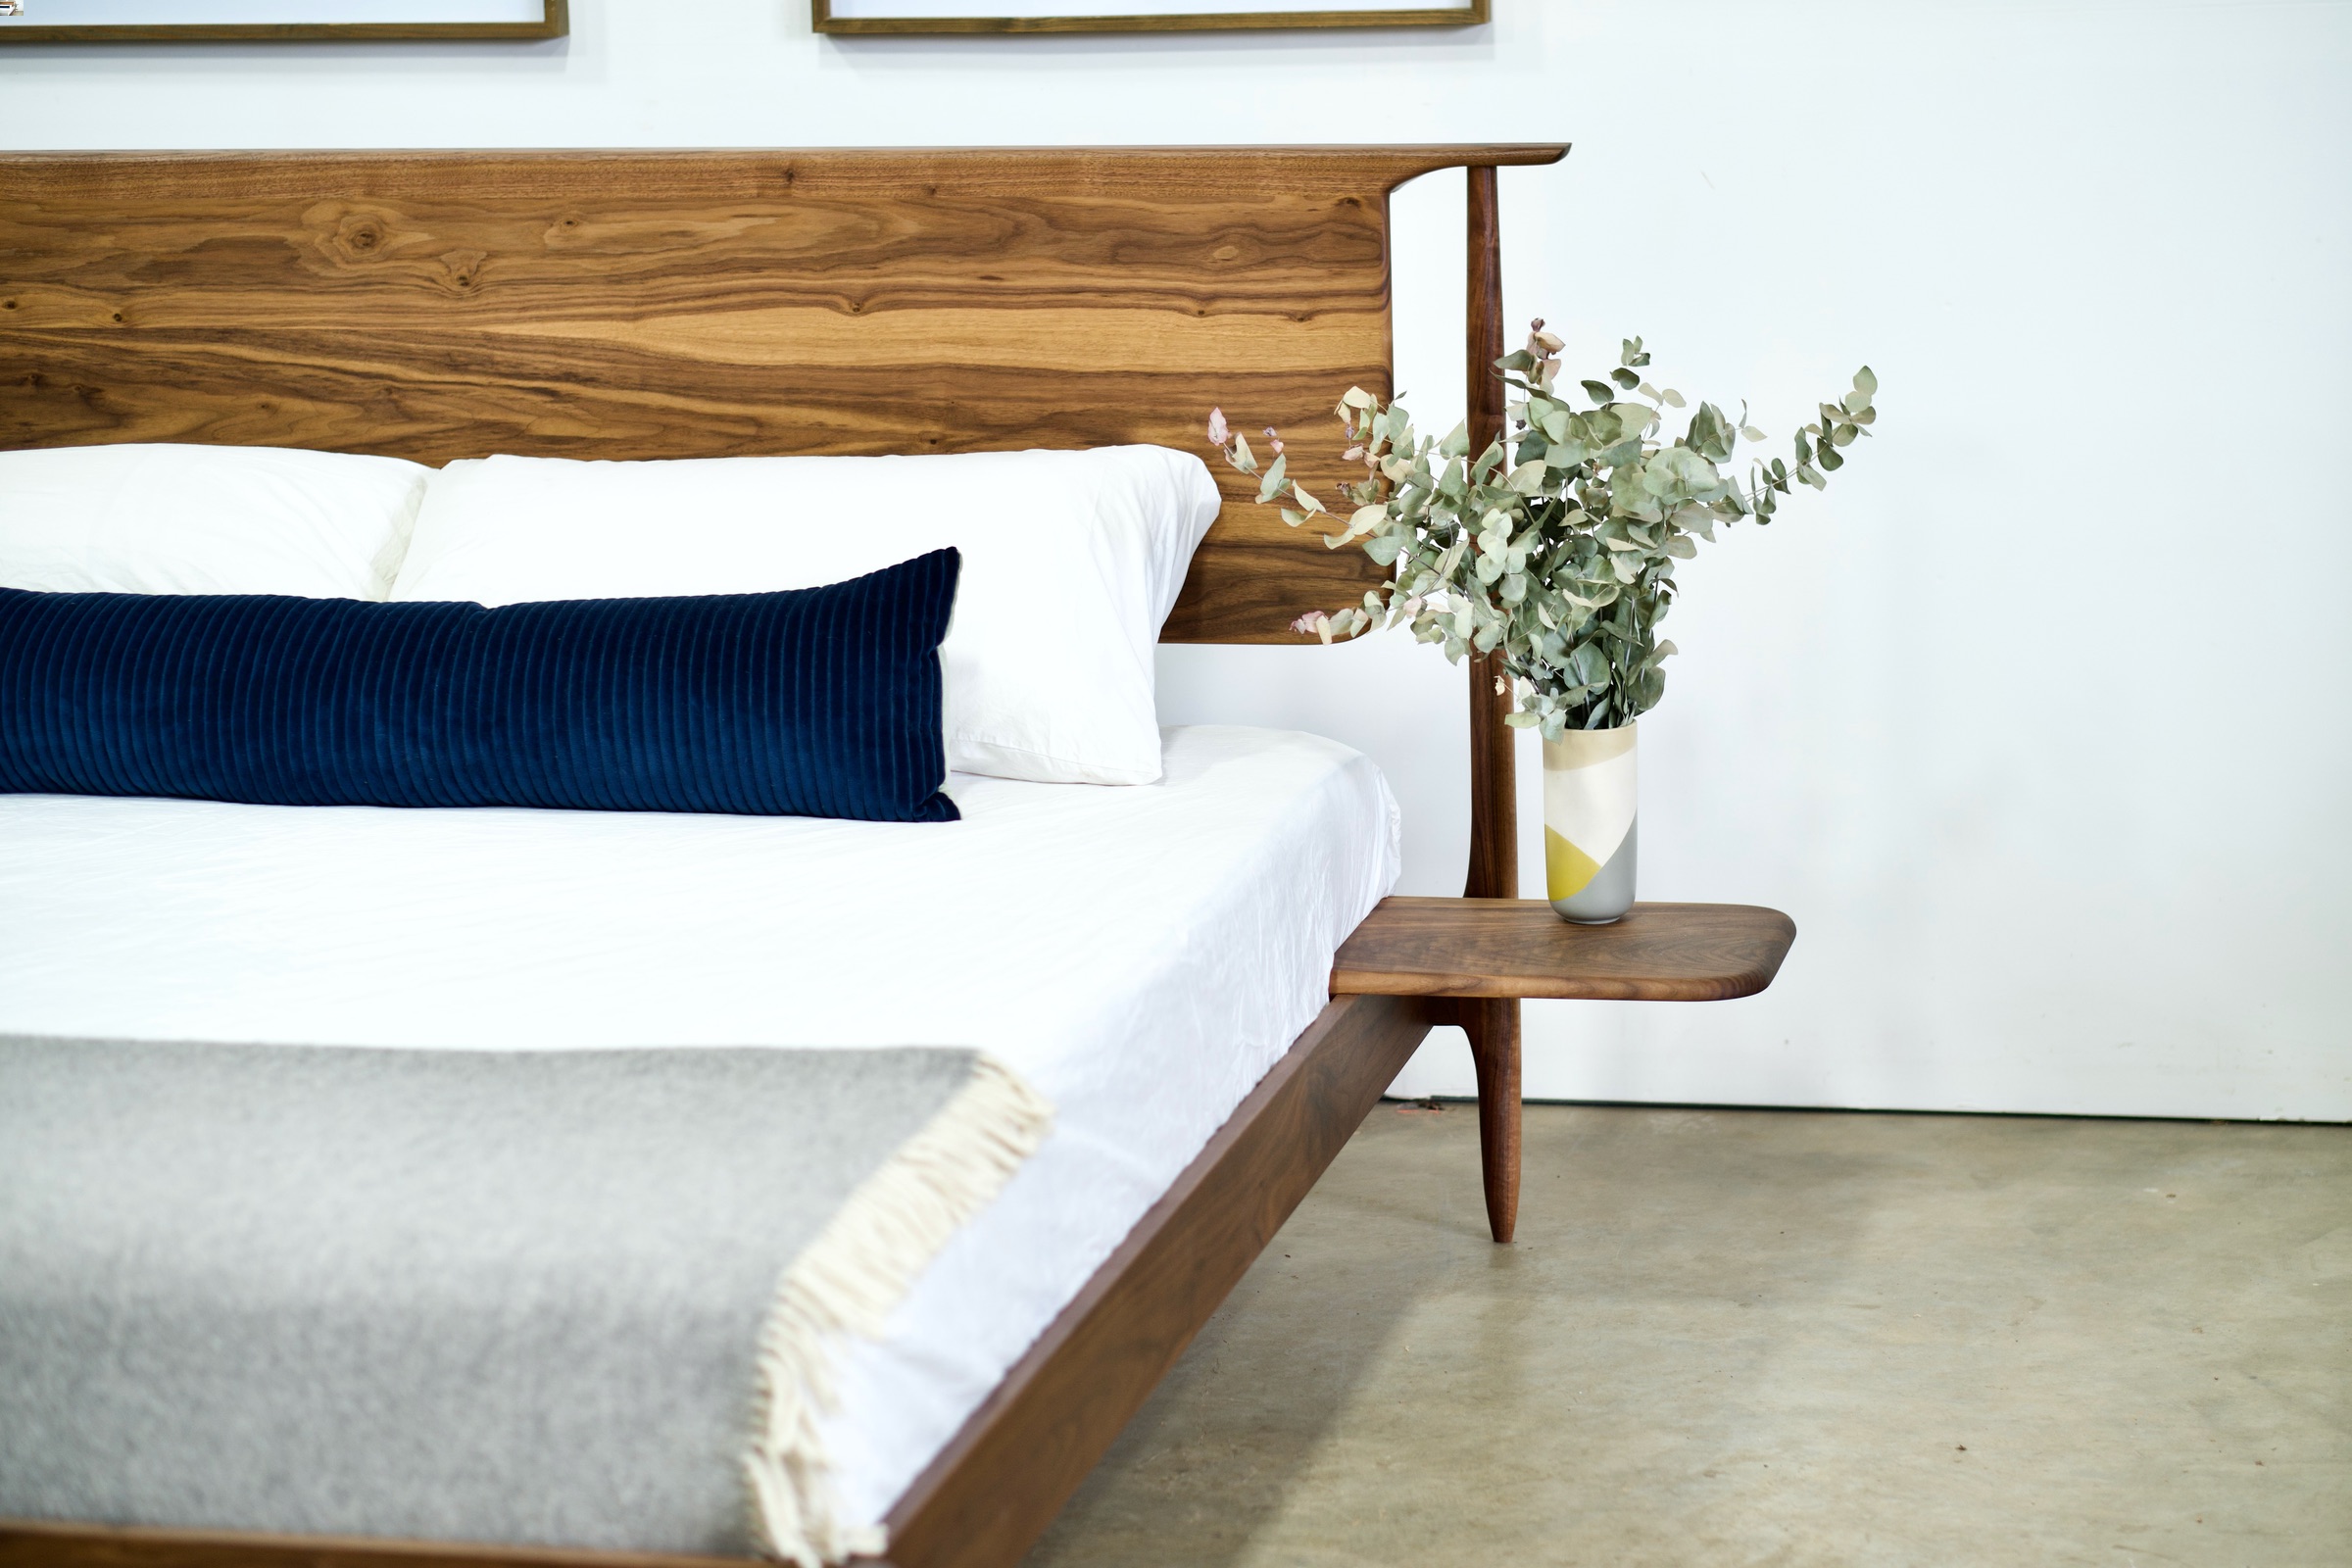 A walnut bed with a headboard that appears to float and a simple side table/shelf attached to the side of the bed